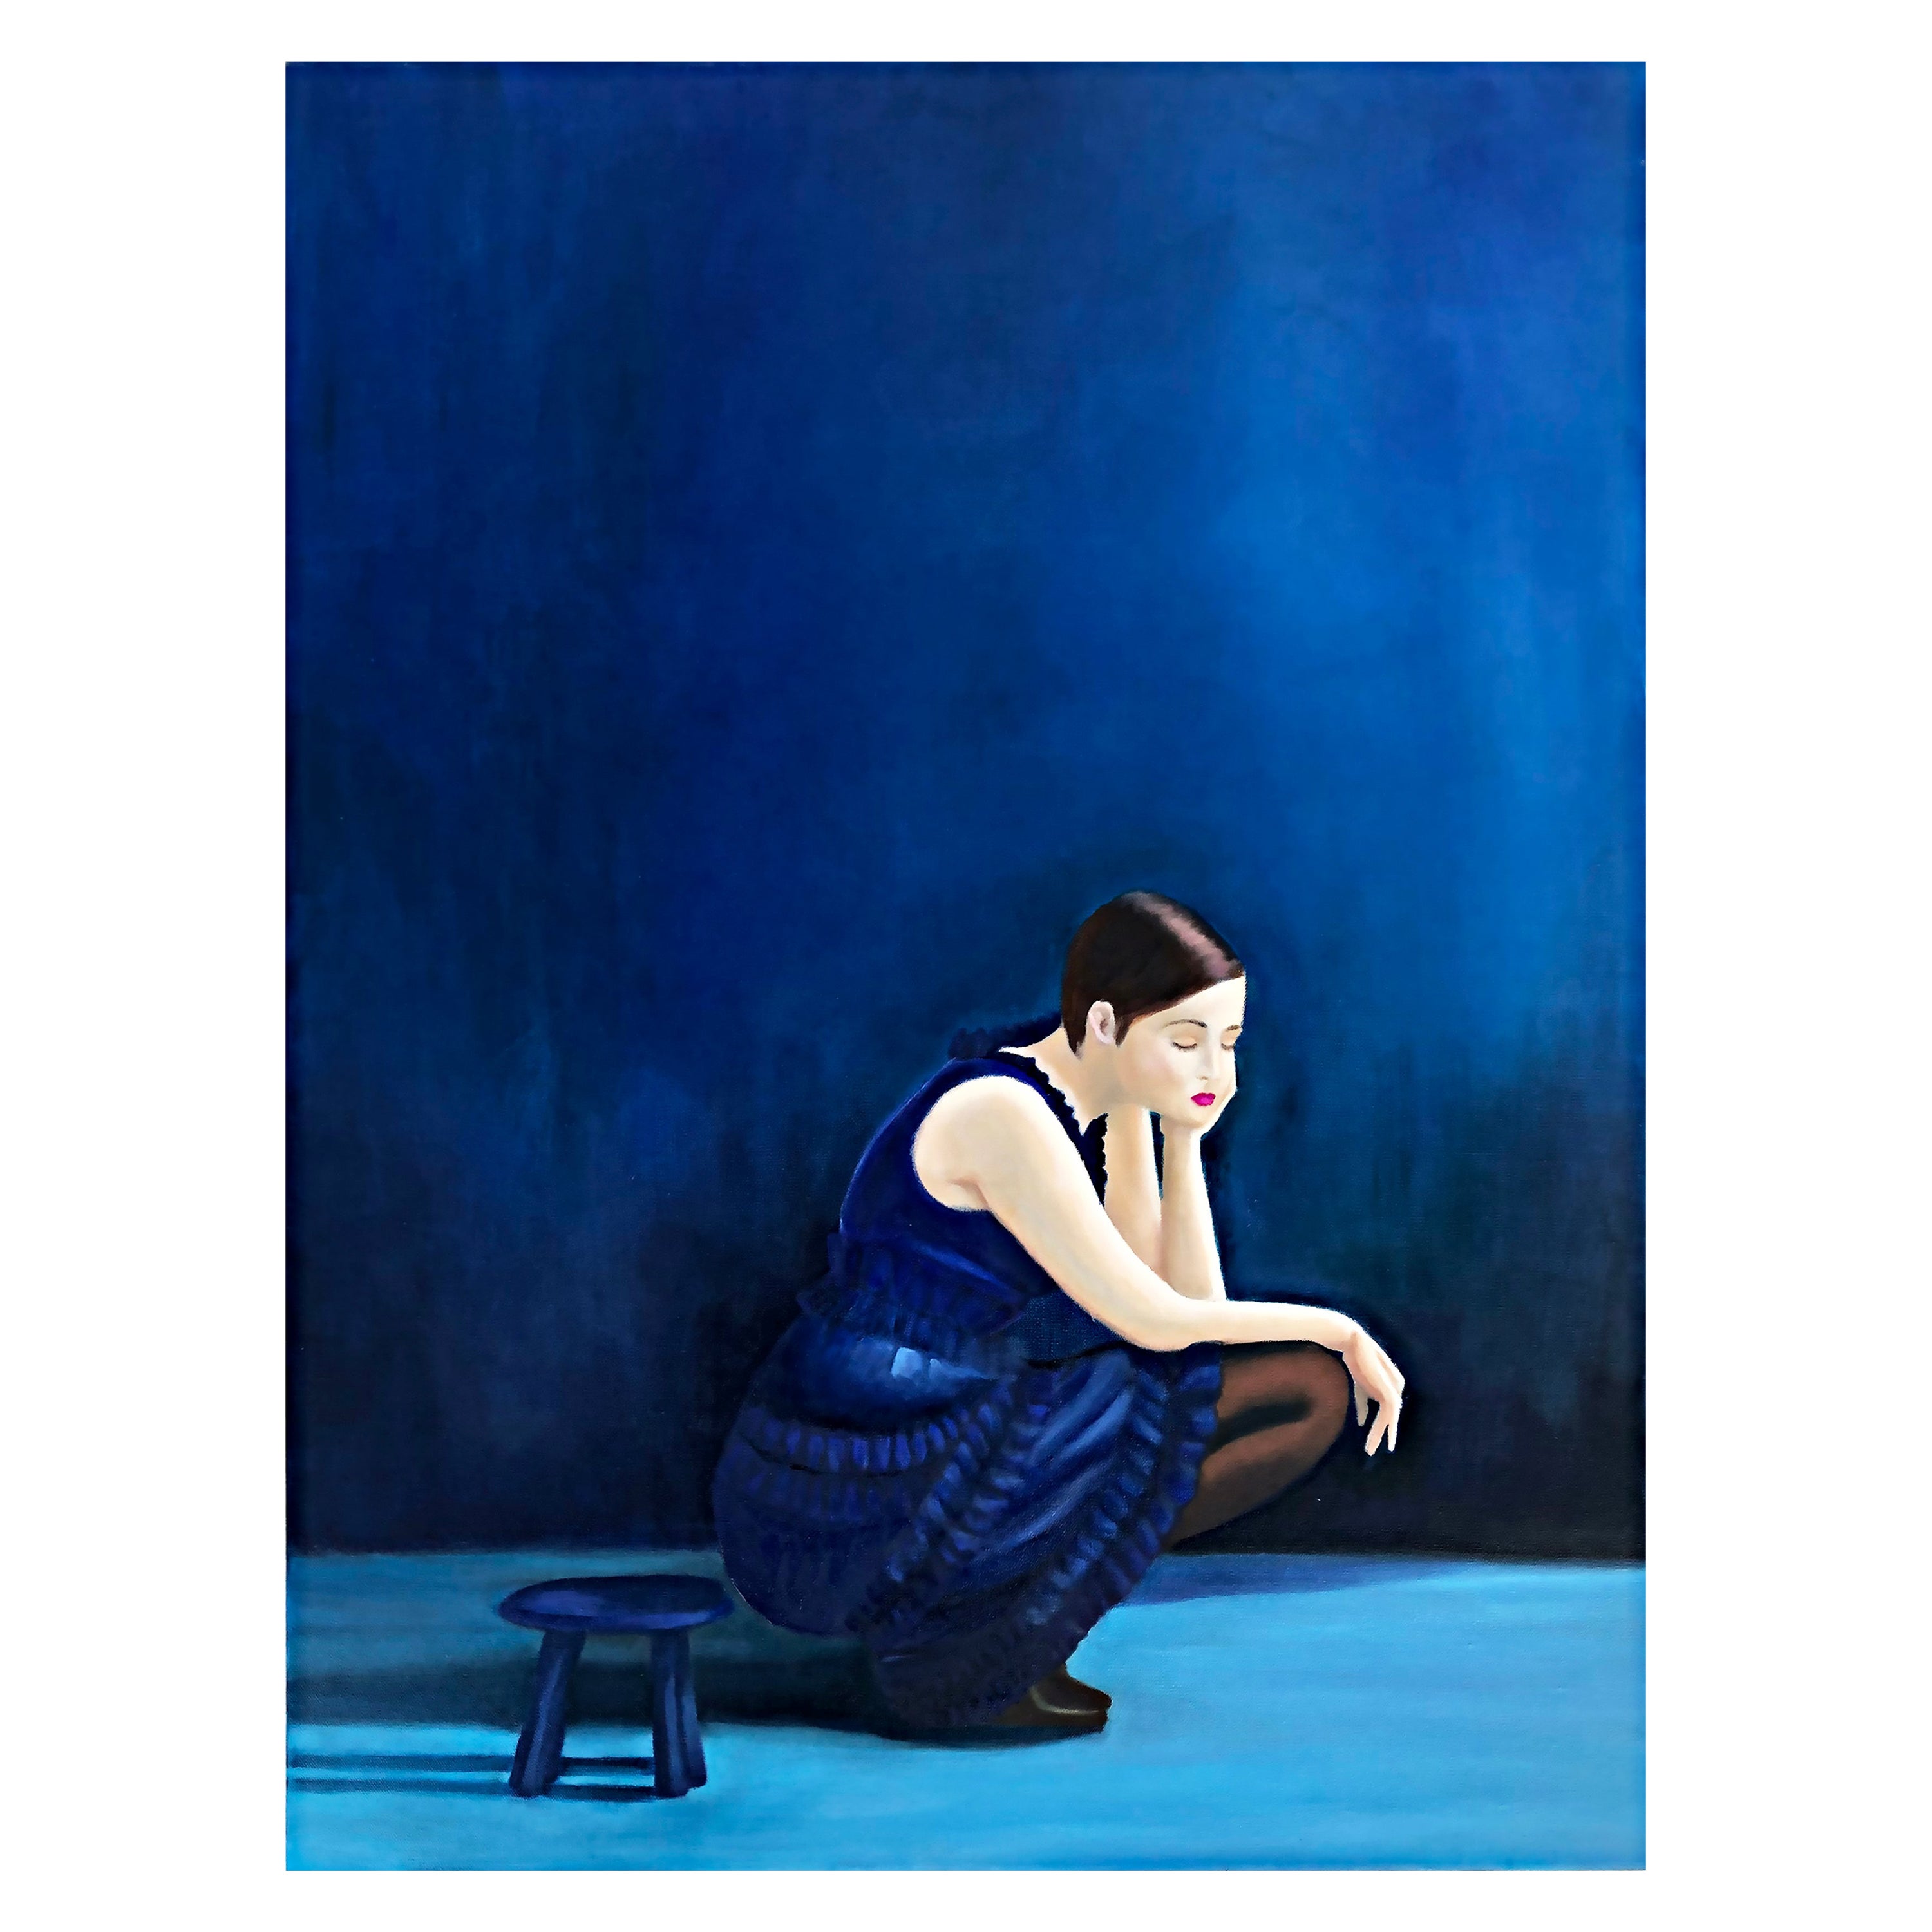 Original Oil Painting on Canvas "Girl in Blue" by Mary Stone